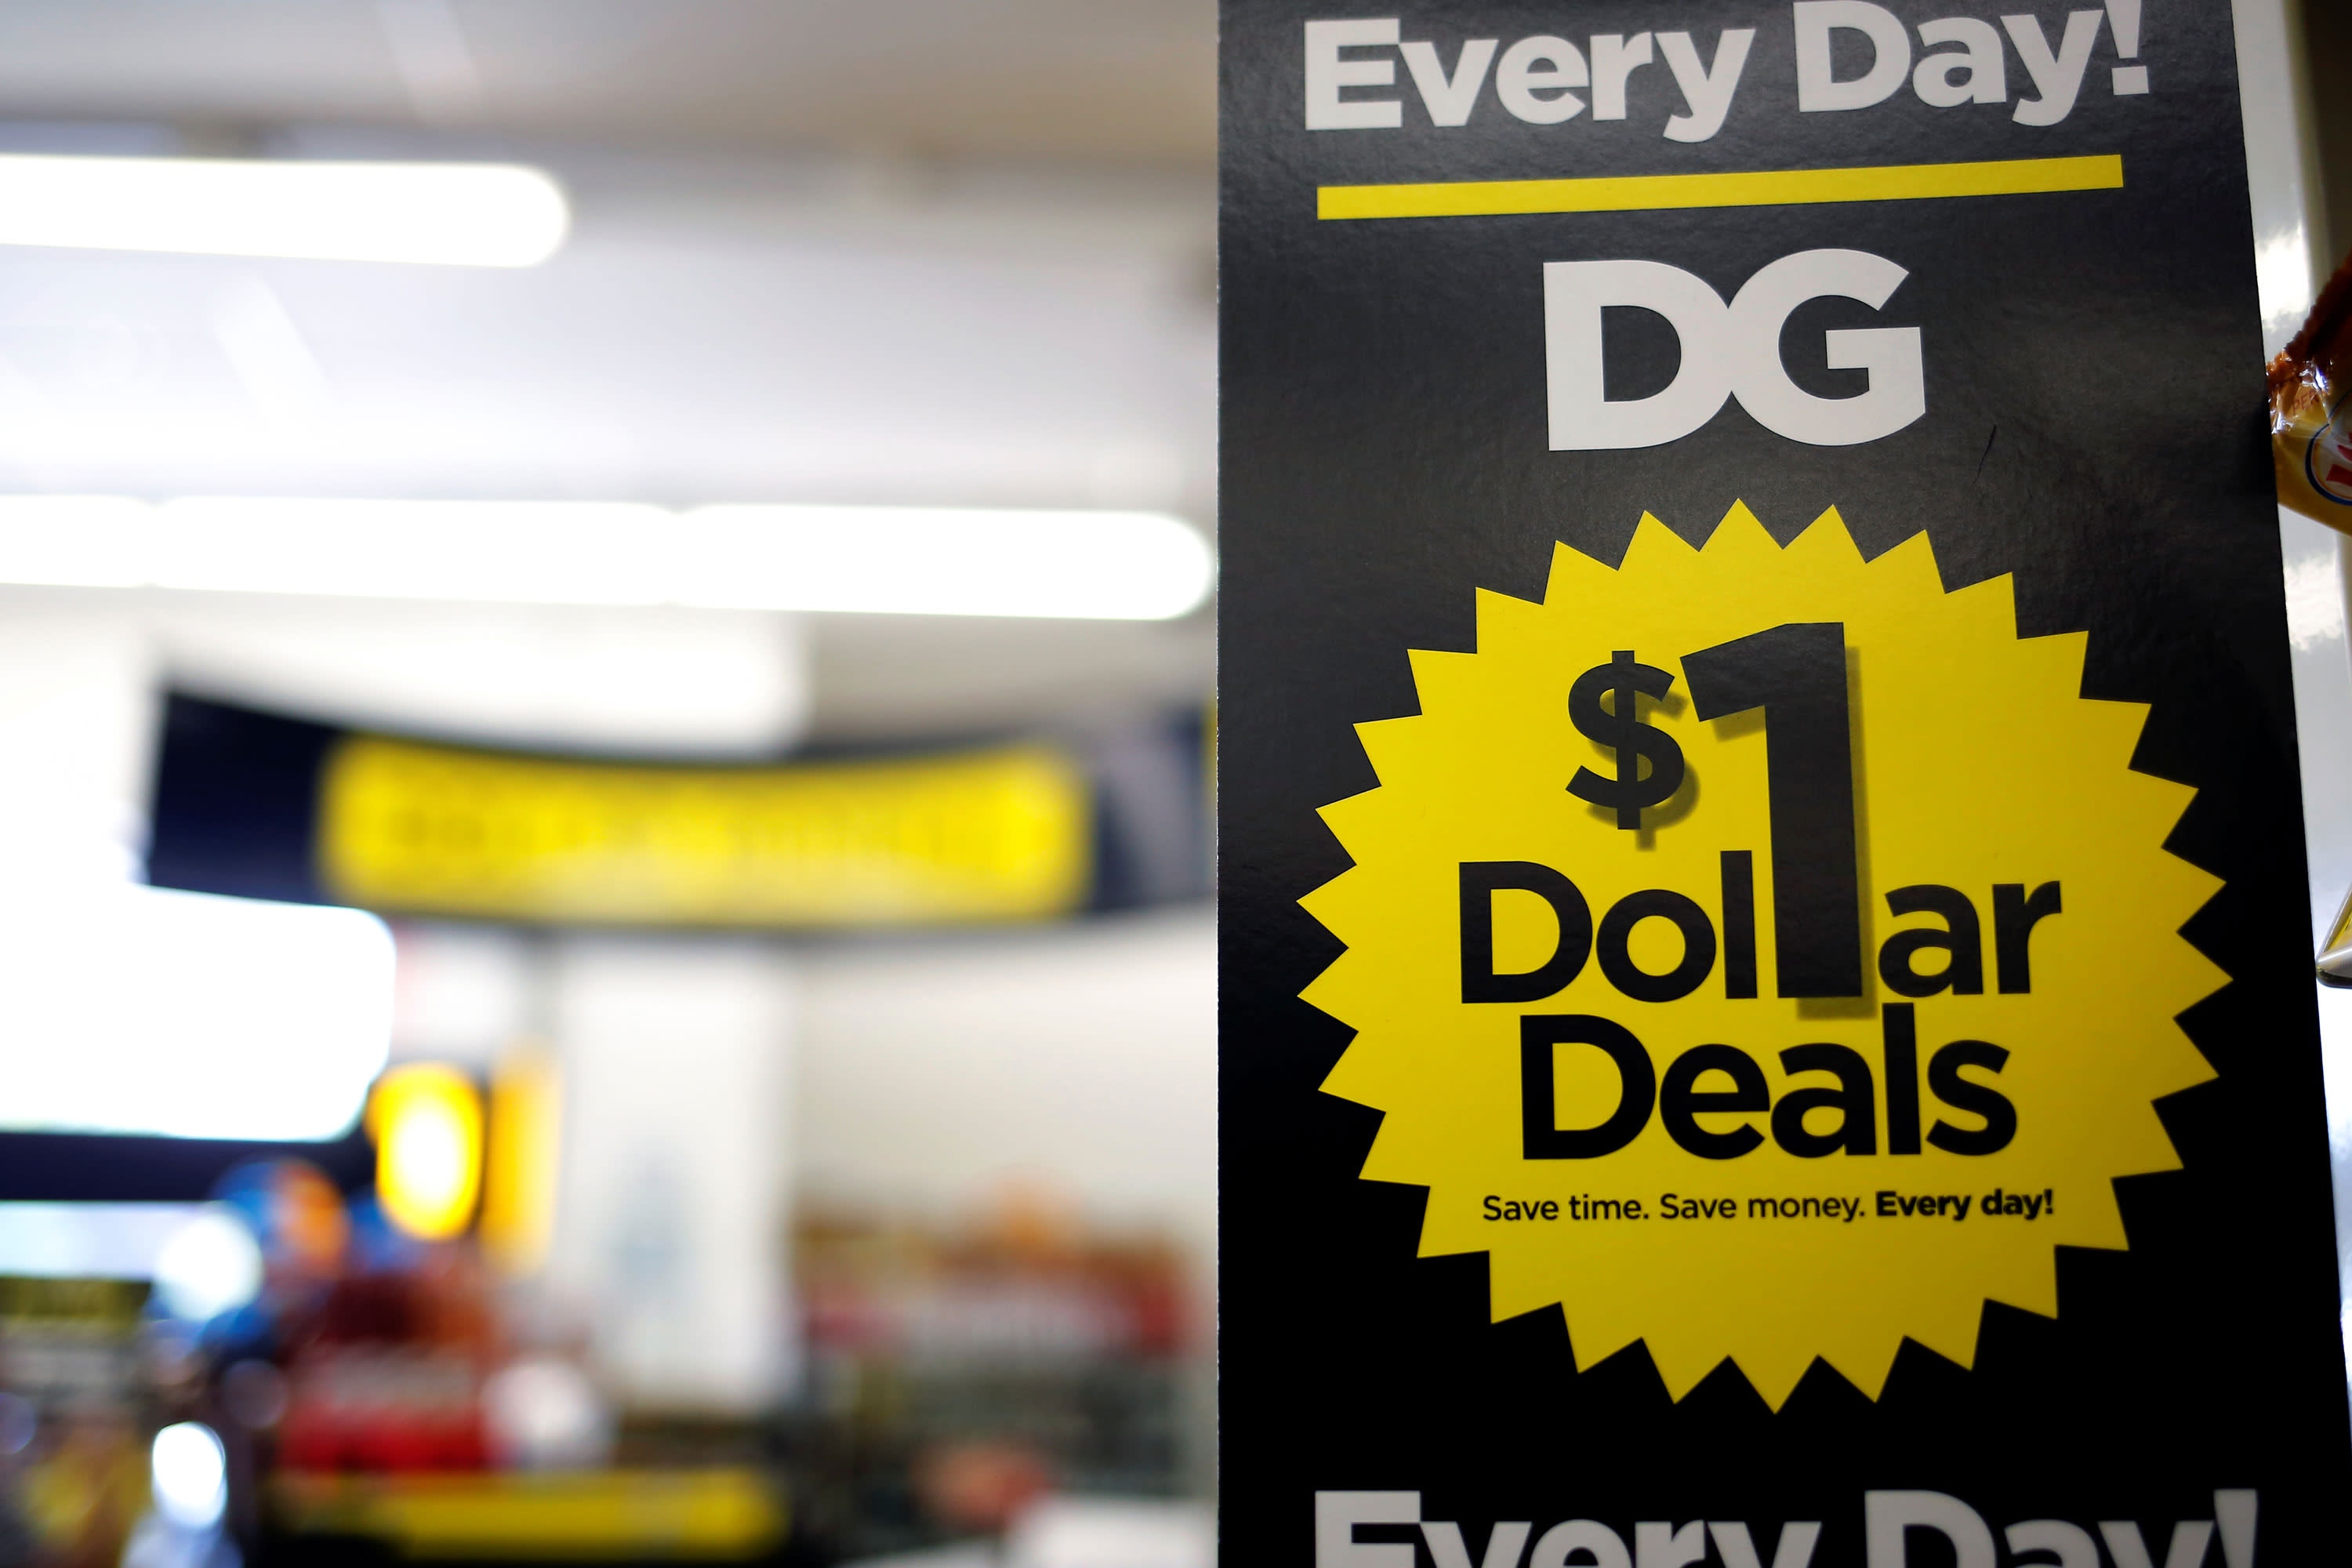 Dollar General will build larger stores and expand Popshelf brand